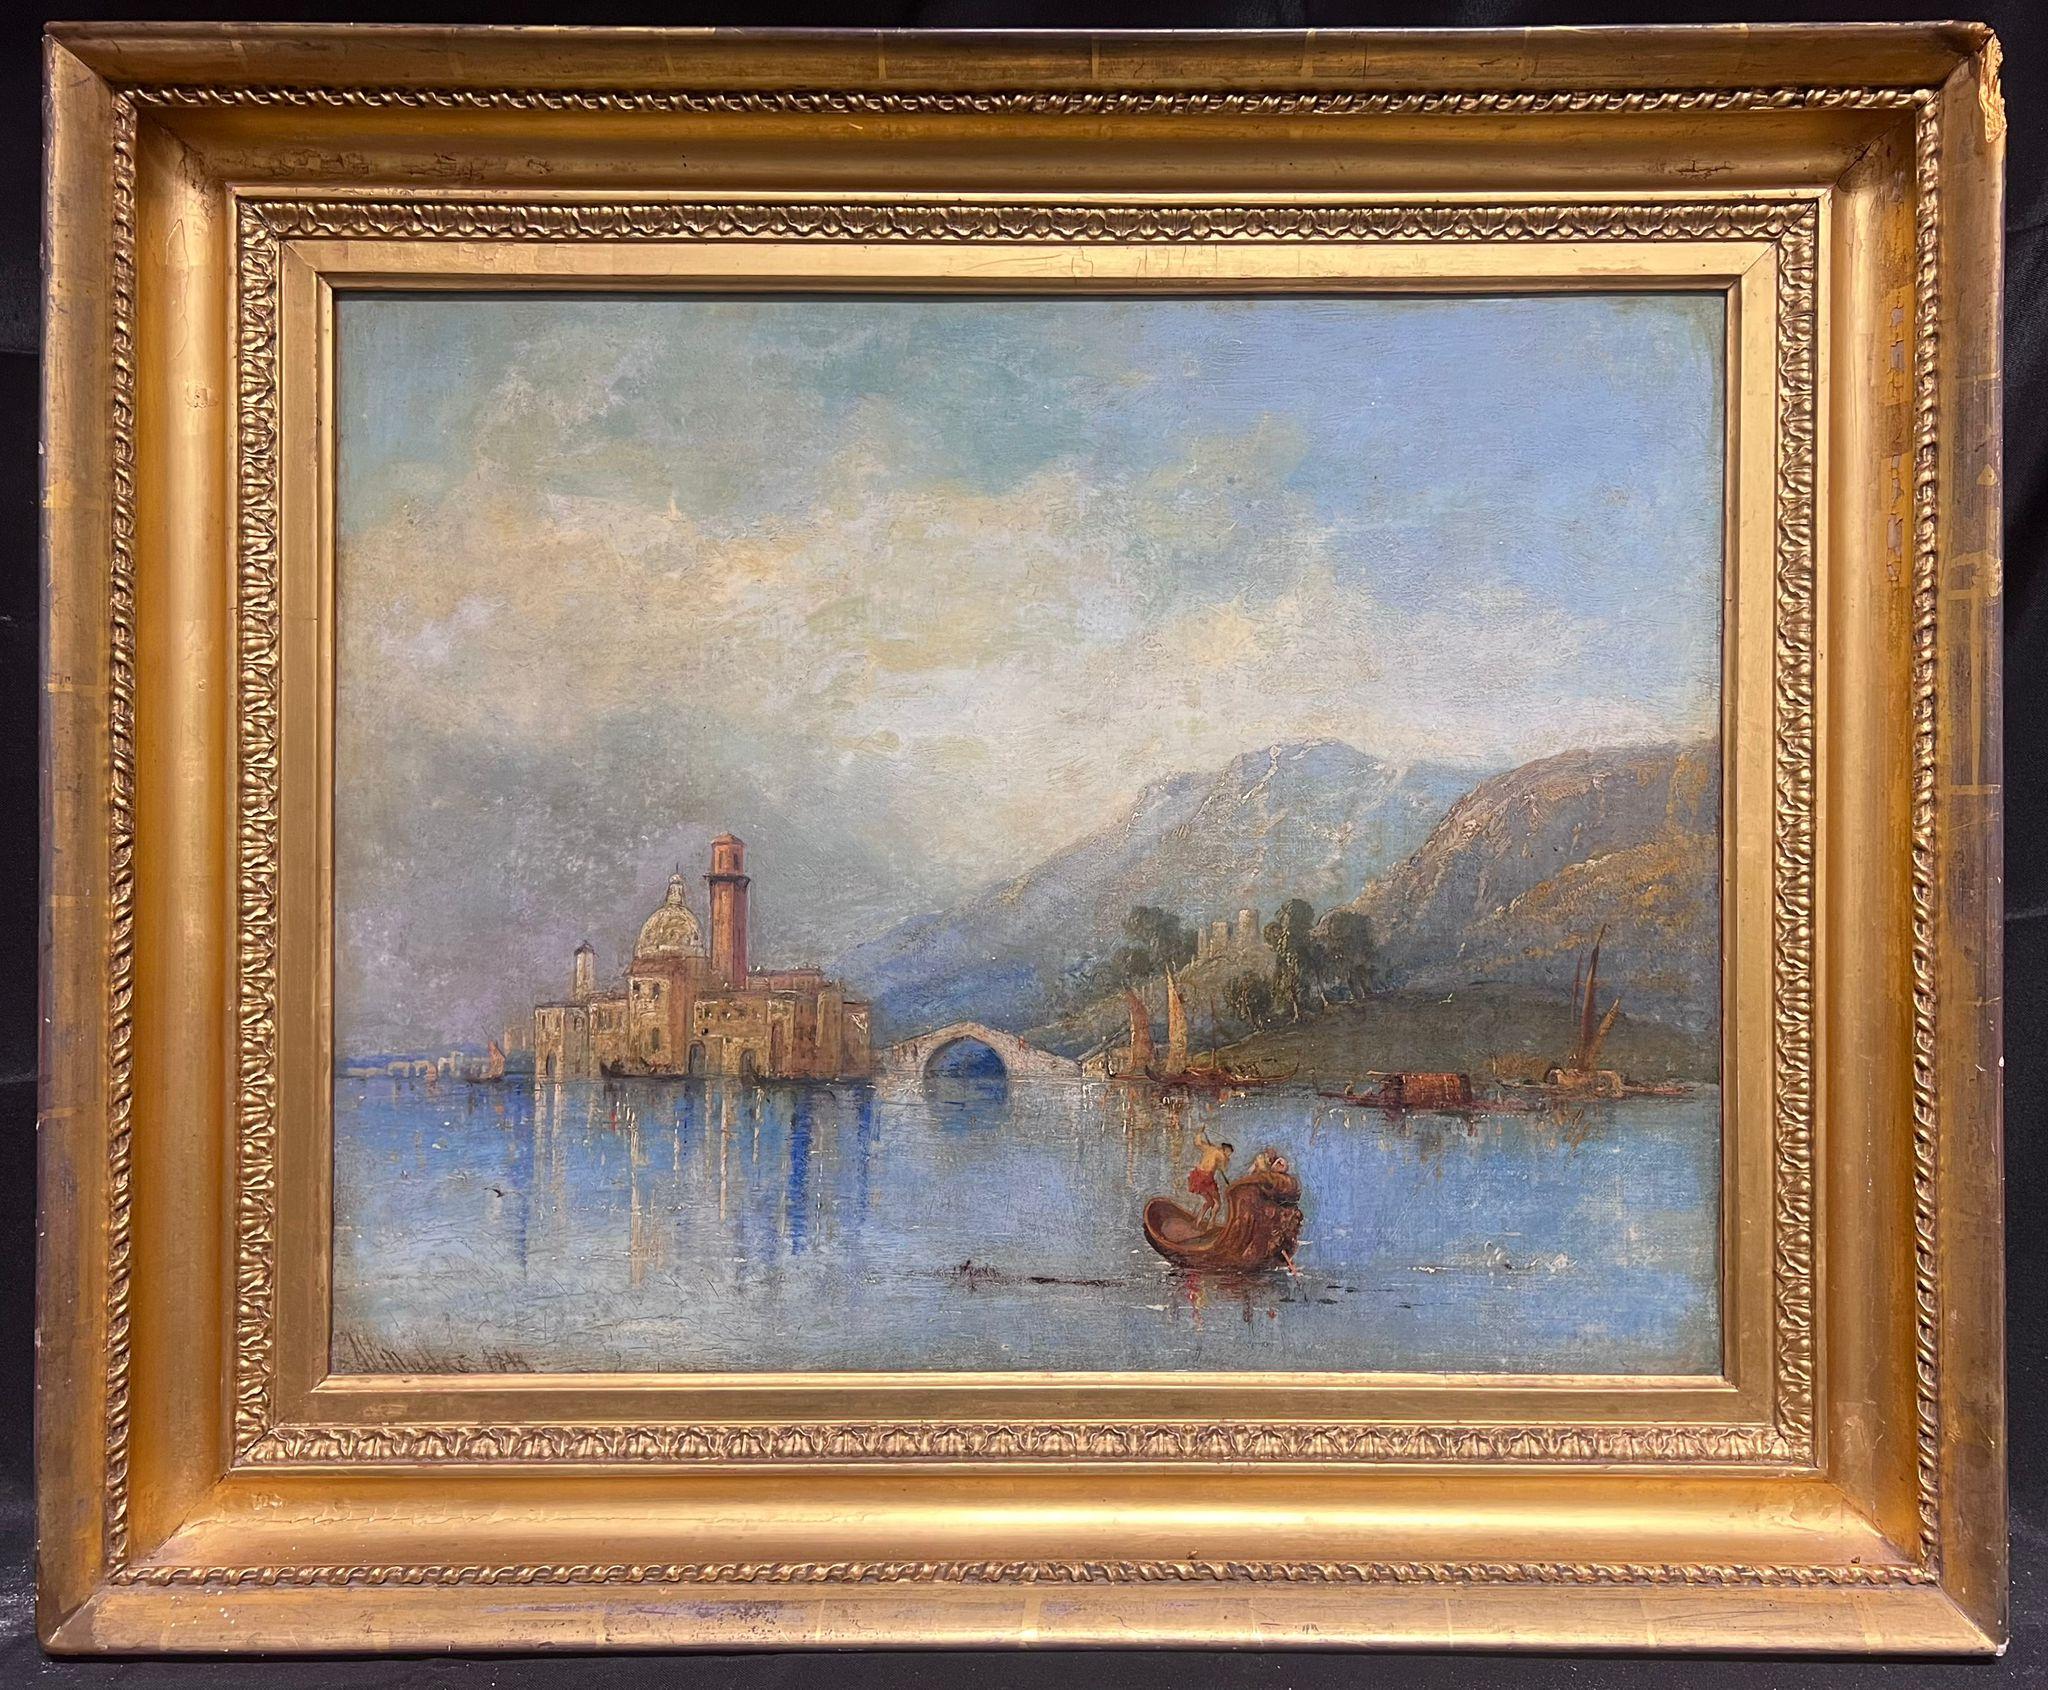 WILLIAM JAMES MULLER (1812-1845) Figurative Painting - Fine Early 19th Century Signed Oil Painting Continental Lake Scene Old City View